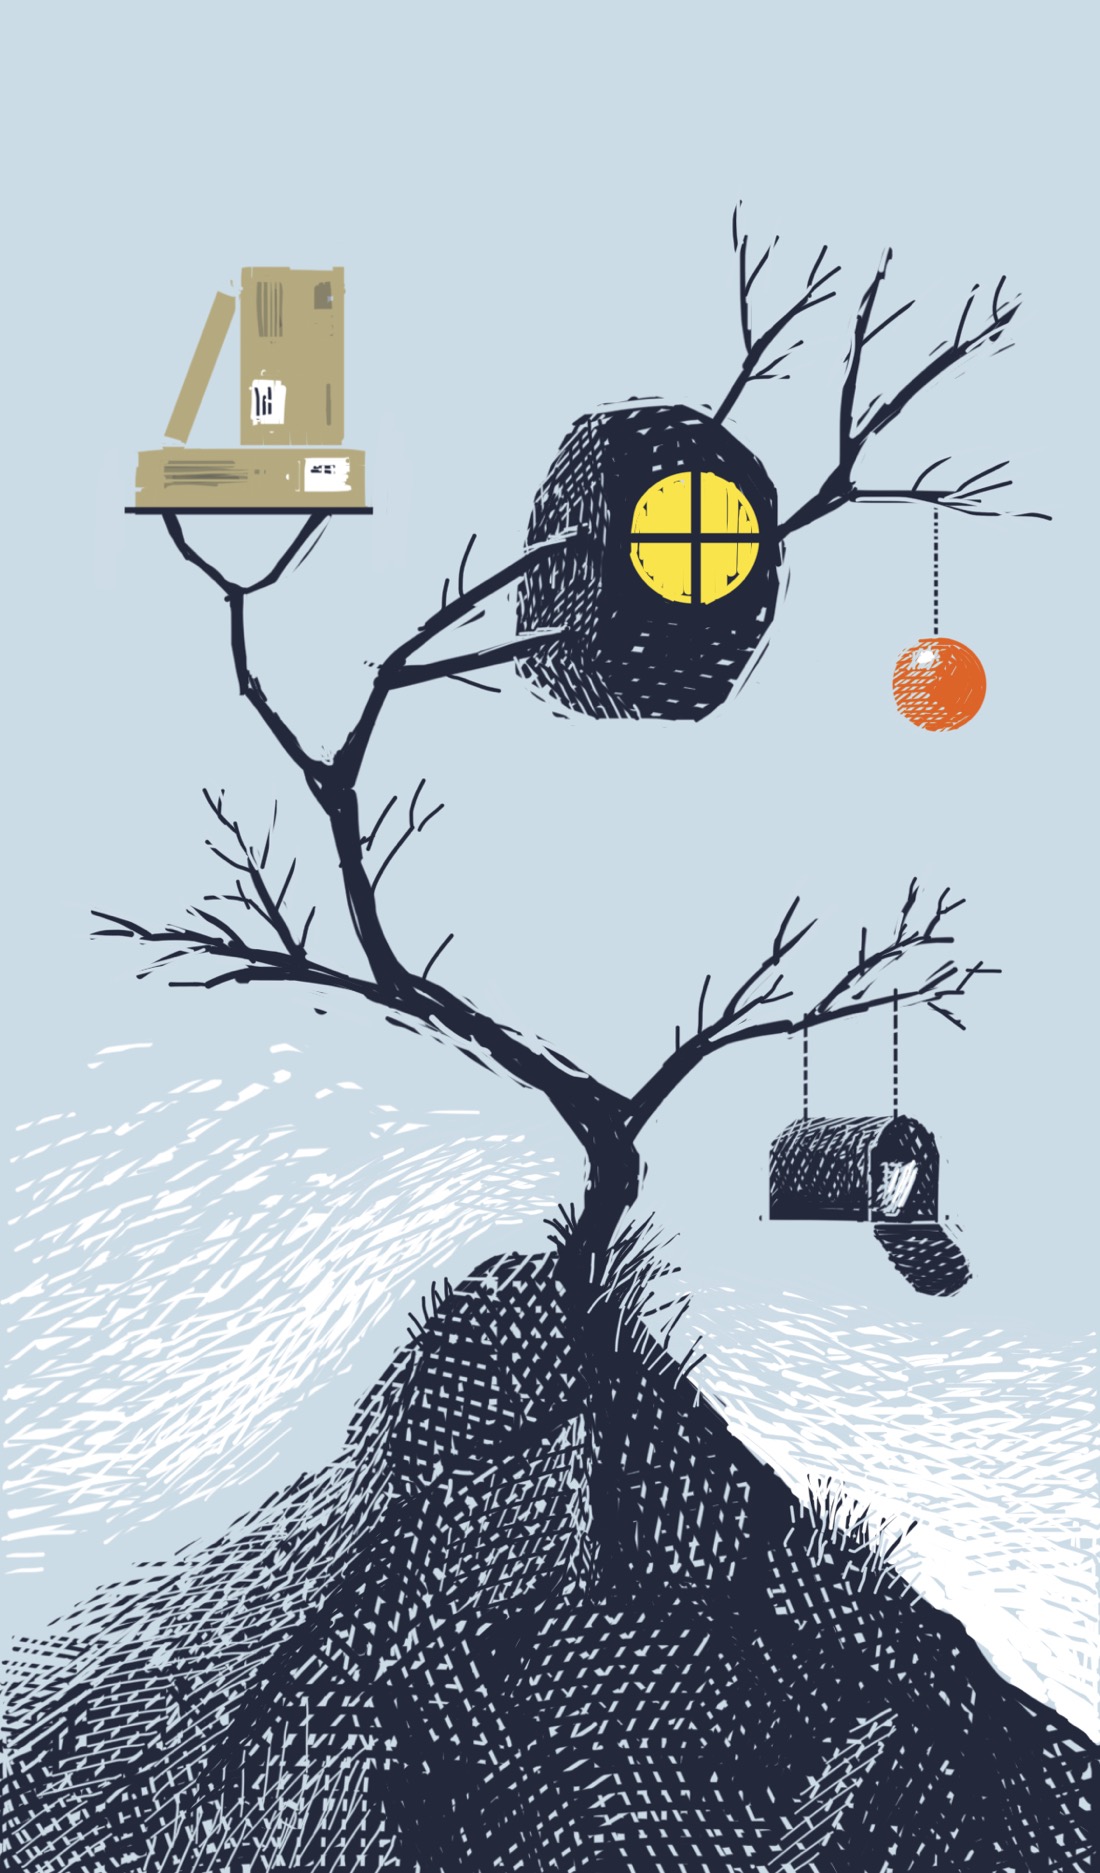 A lonely, sharp mountain top on which stands a small, twisted tree with few branches and no leaves. Hanging from the tree is a mailbox and a red decorative sphere. Built into the branches is a small, spherical dwelling that looks a little like a wasp nest. The dwelling has a circular window in it, brightly lit. Also built into the branches is a platform with several brown cardboard boxes stacked on top of it; the kind that would be delivered from Amazon.